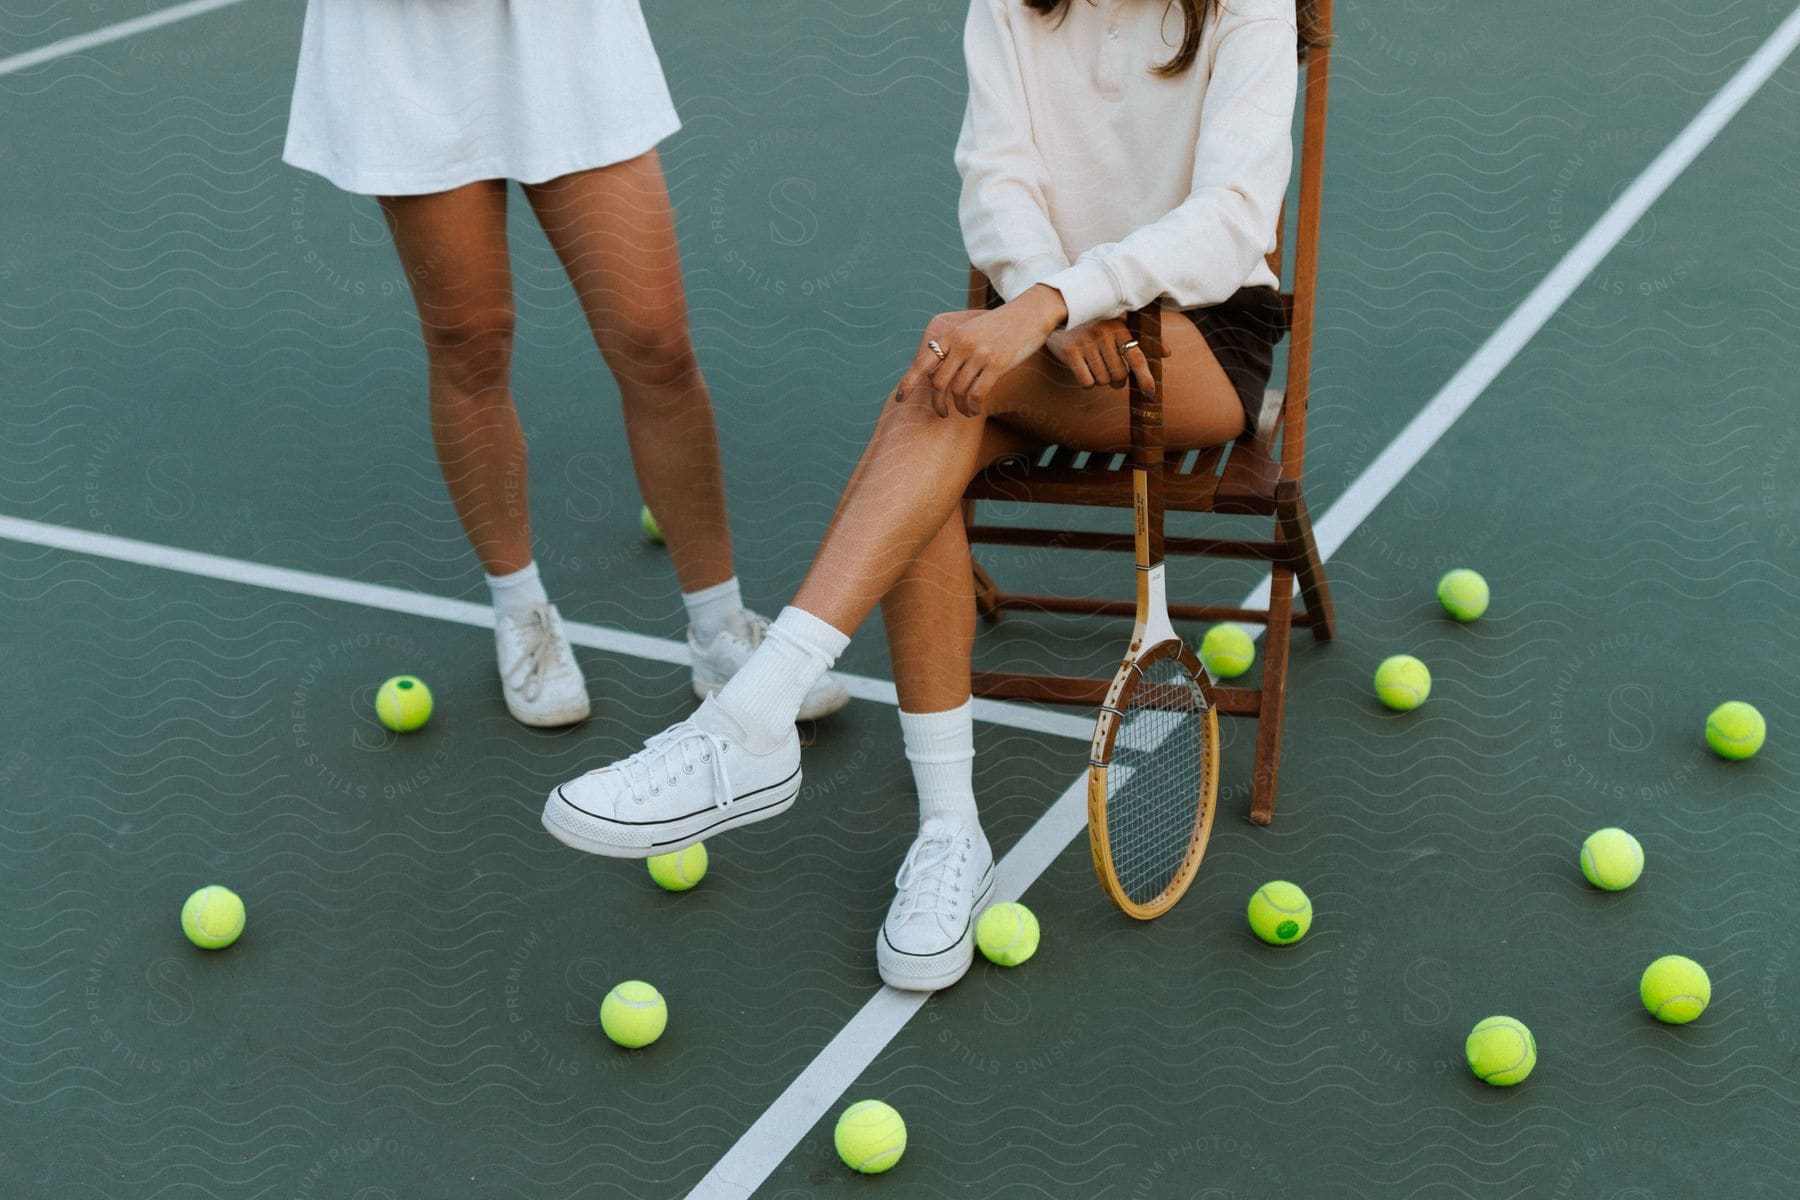 Two women on a tennis court one sitting in a chair and the other standing during the day